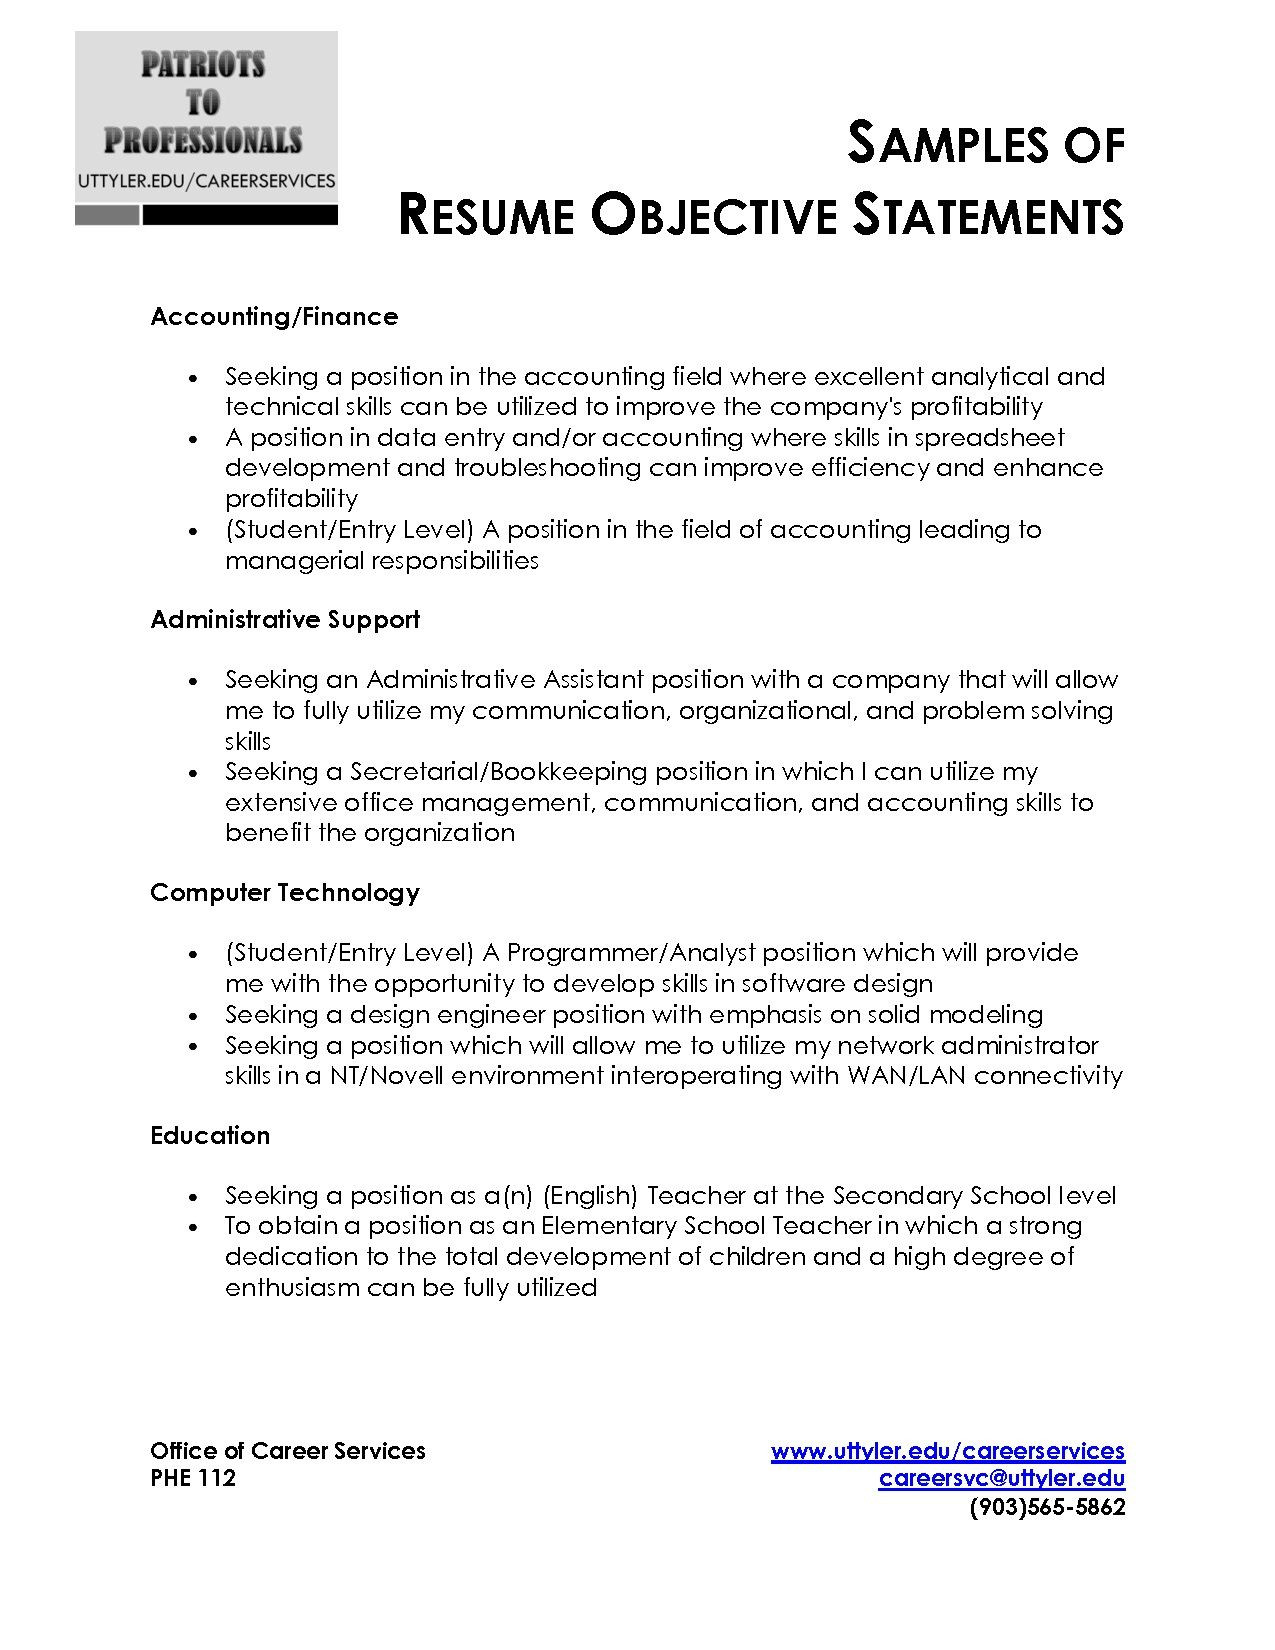 Goals and Objectives Sample In Resume Sample Resume Objective Statement Free Resume Templates Resume …